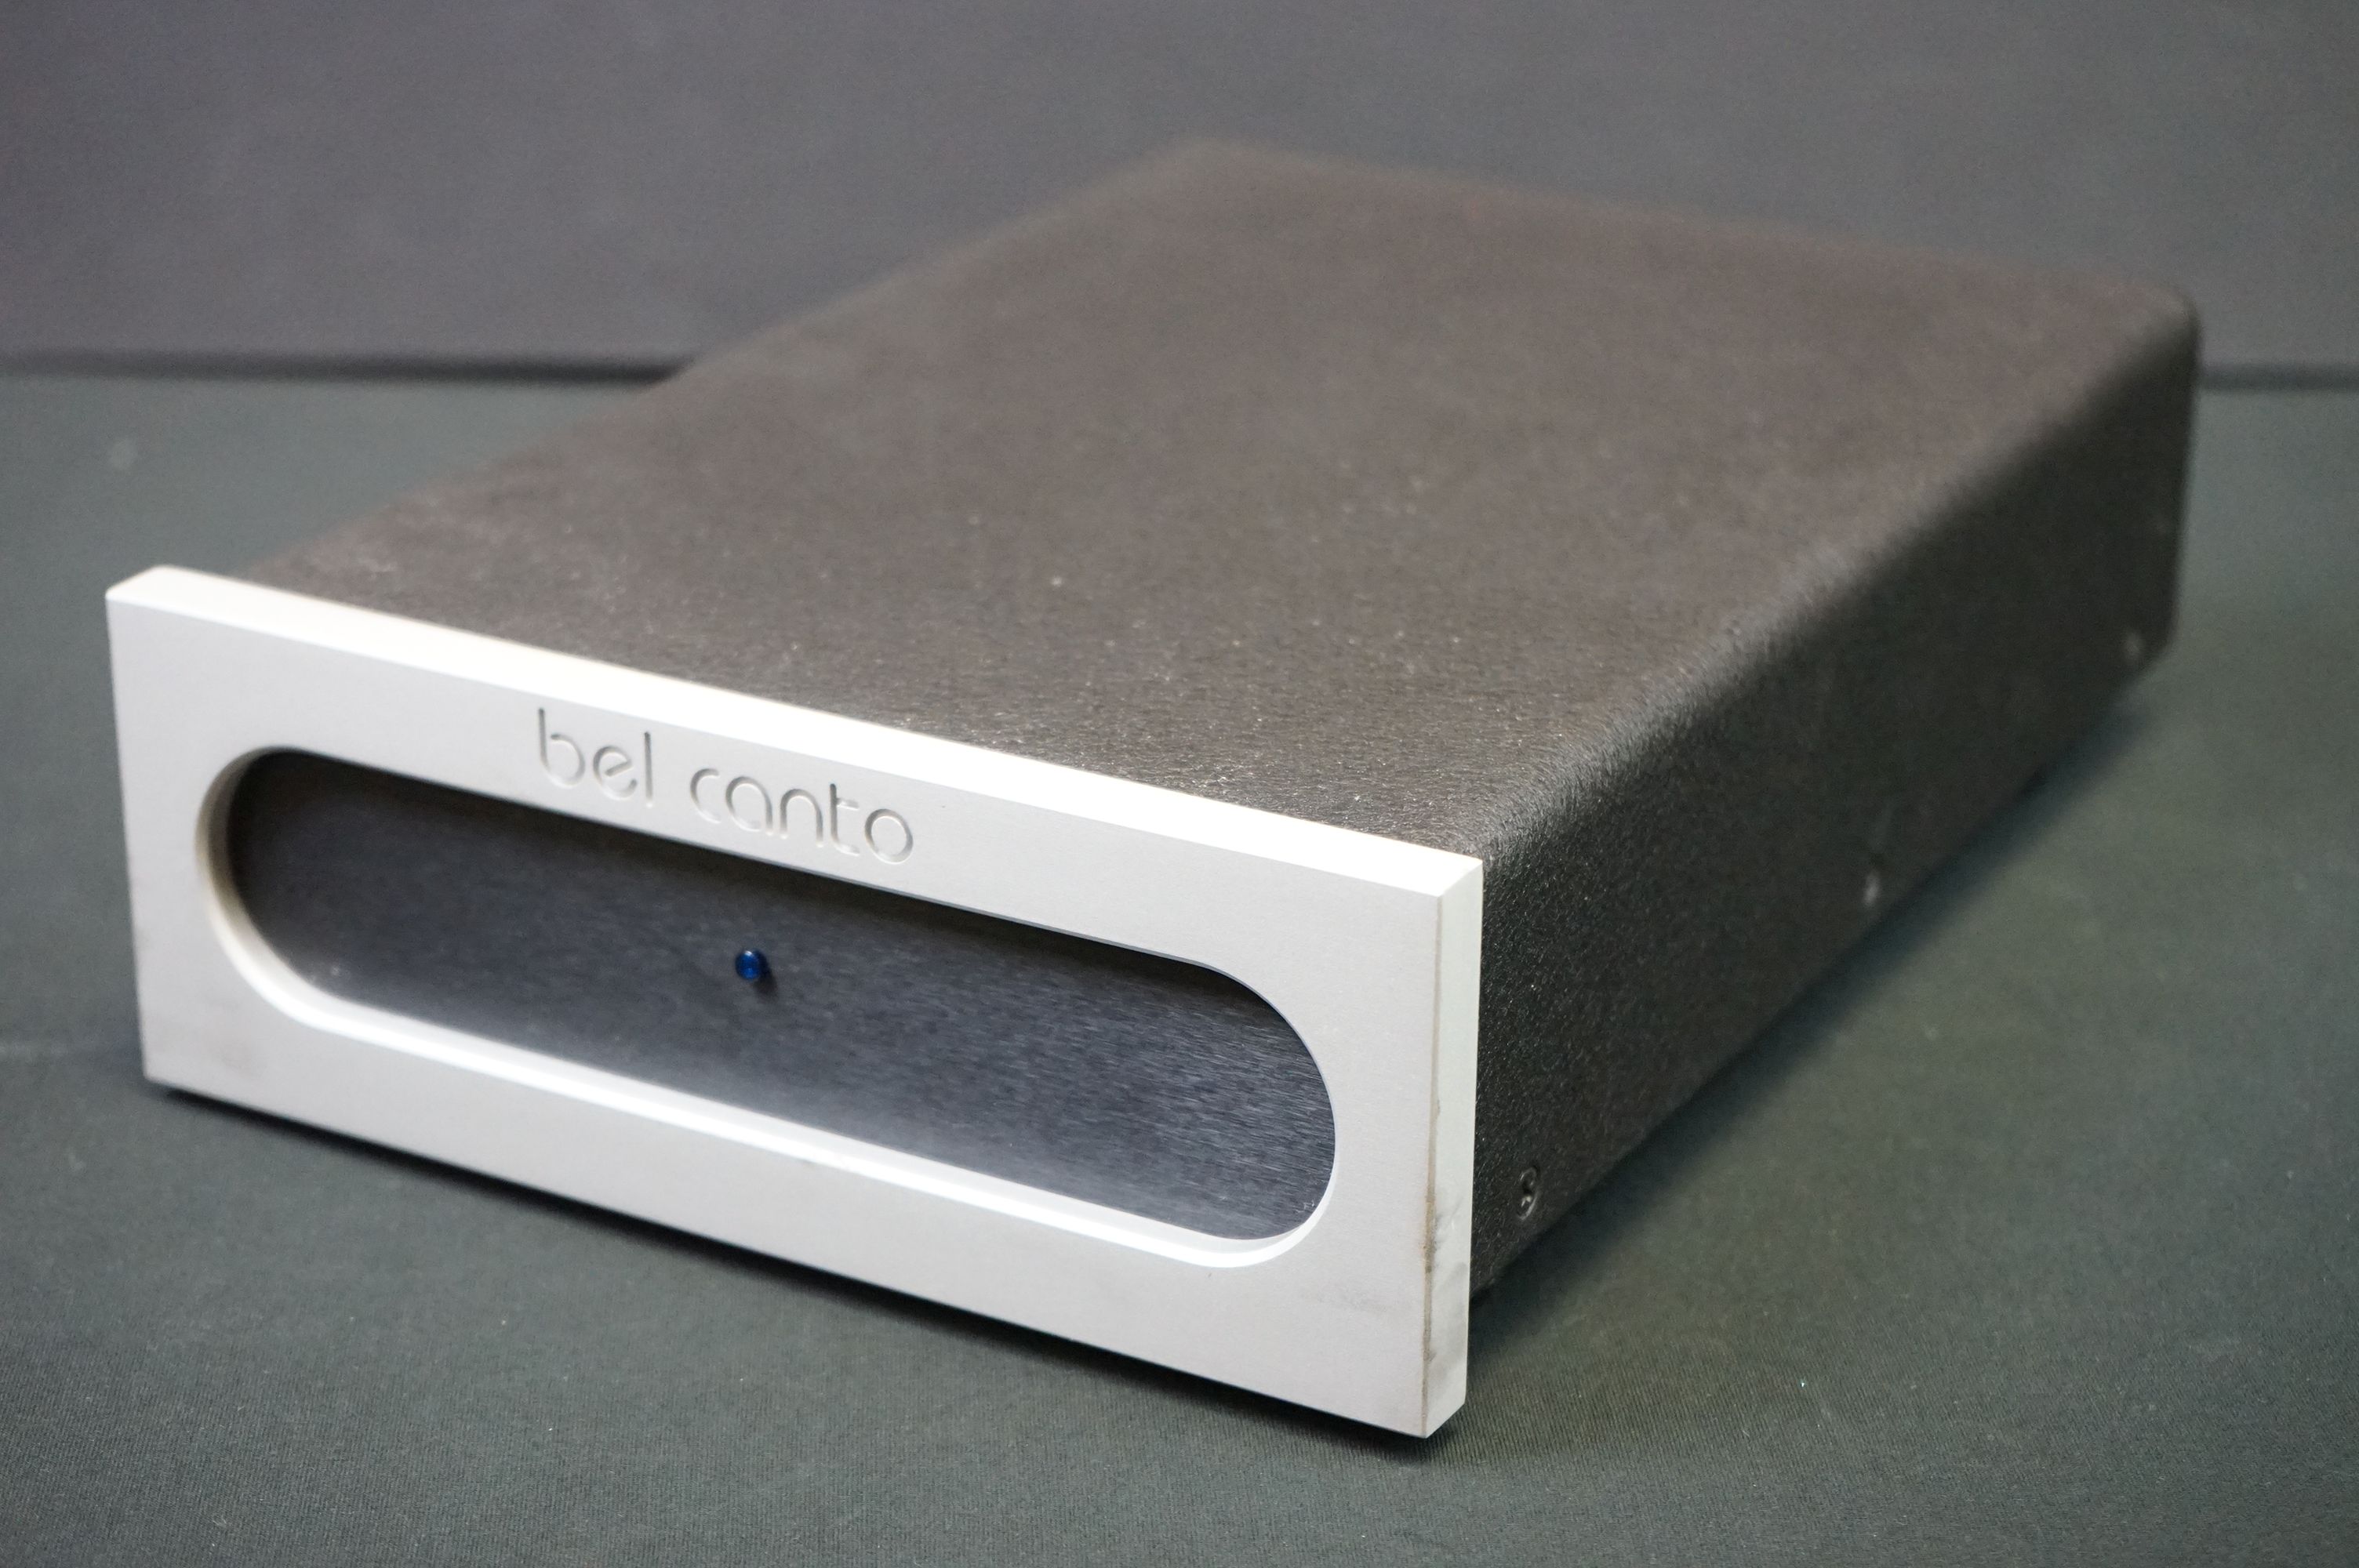 Music Equipment - Bel Canto Design DAC 1.7 DAC Headphone Amp and Level Control, a Bel Canto VBS1 - Image 7 of 9